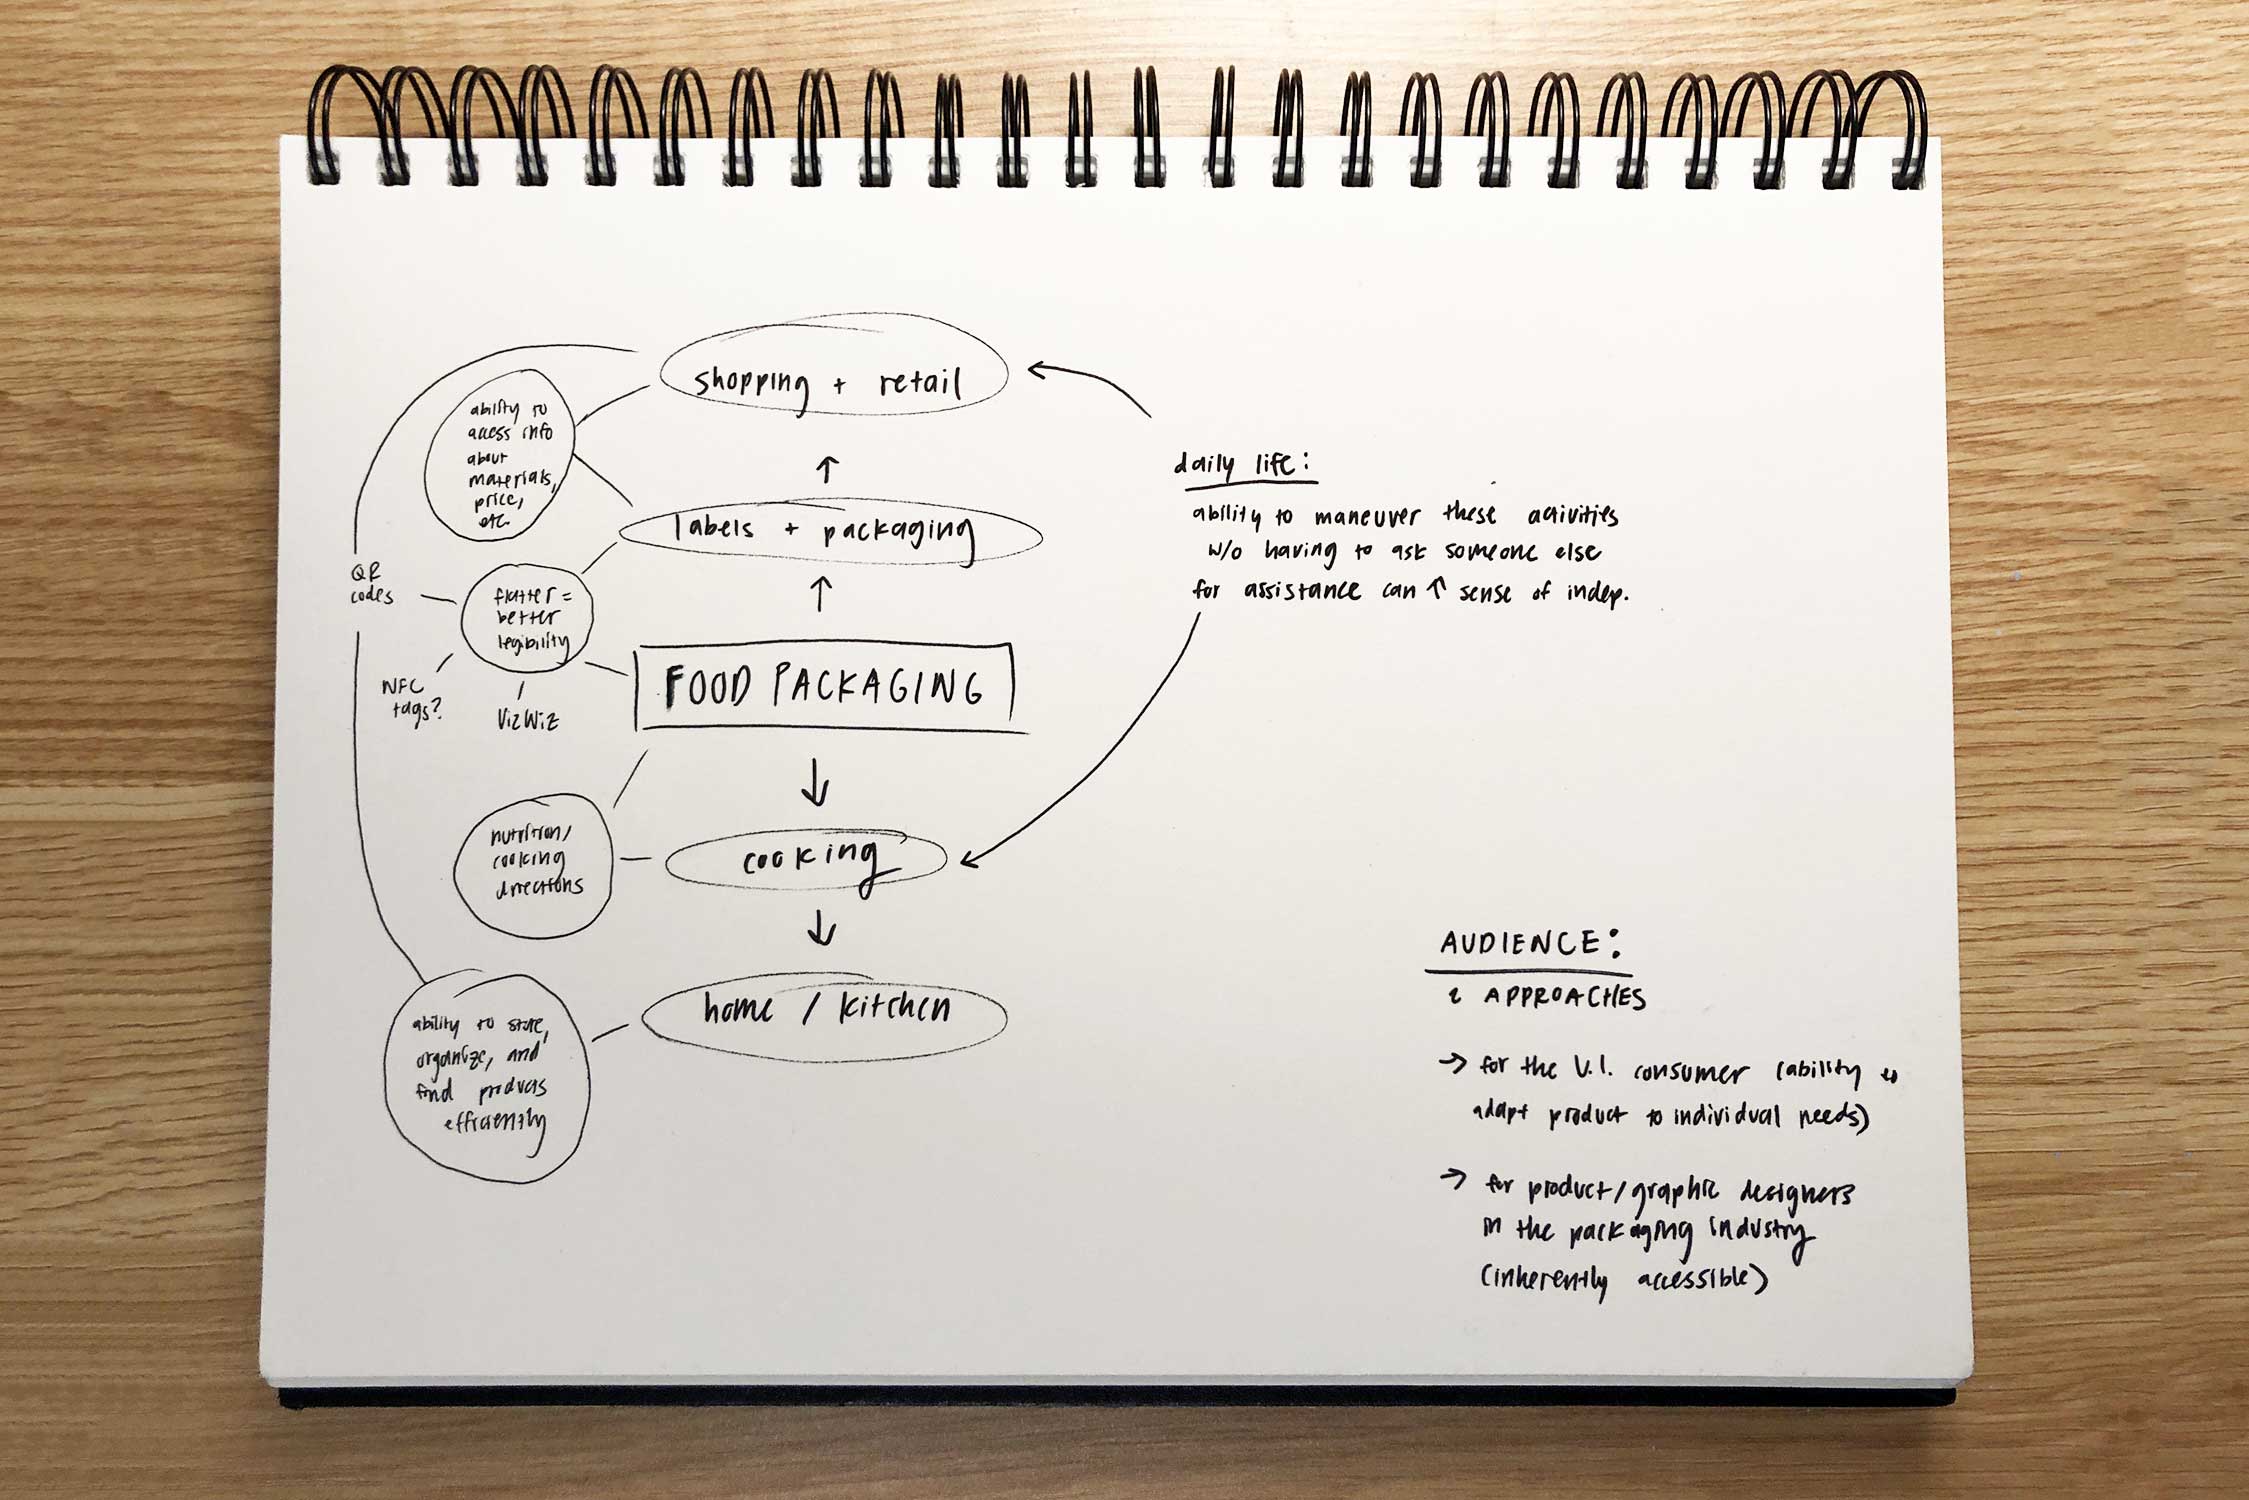 A spiral-bound sketchbook displaying a diagram of food packaging and its relationship to broader spheres, such as shopping/retail and home/kitchen.